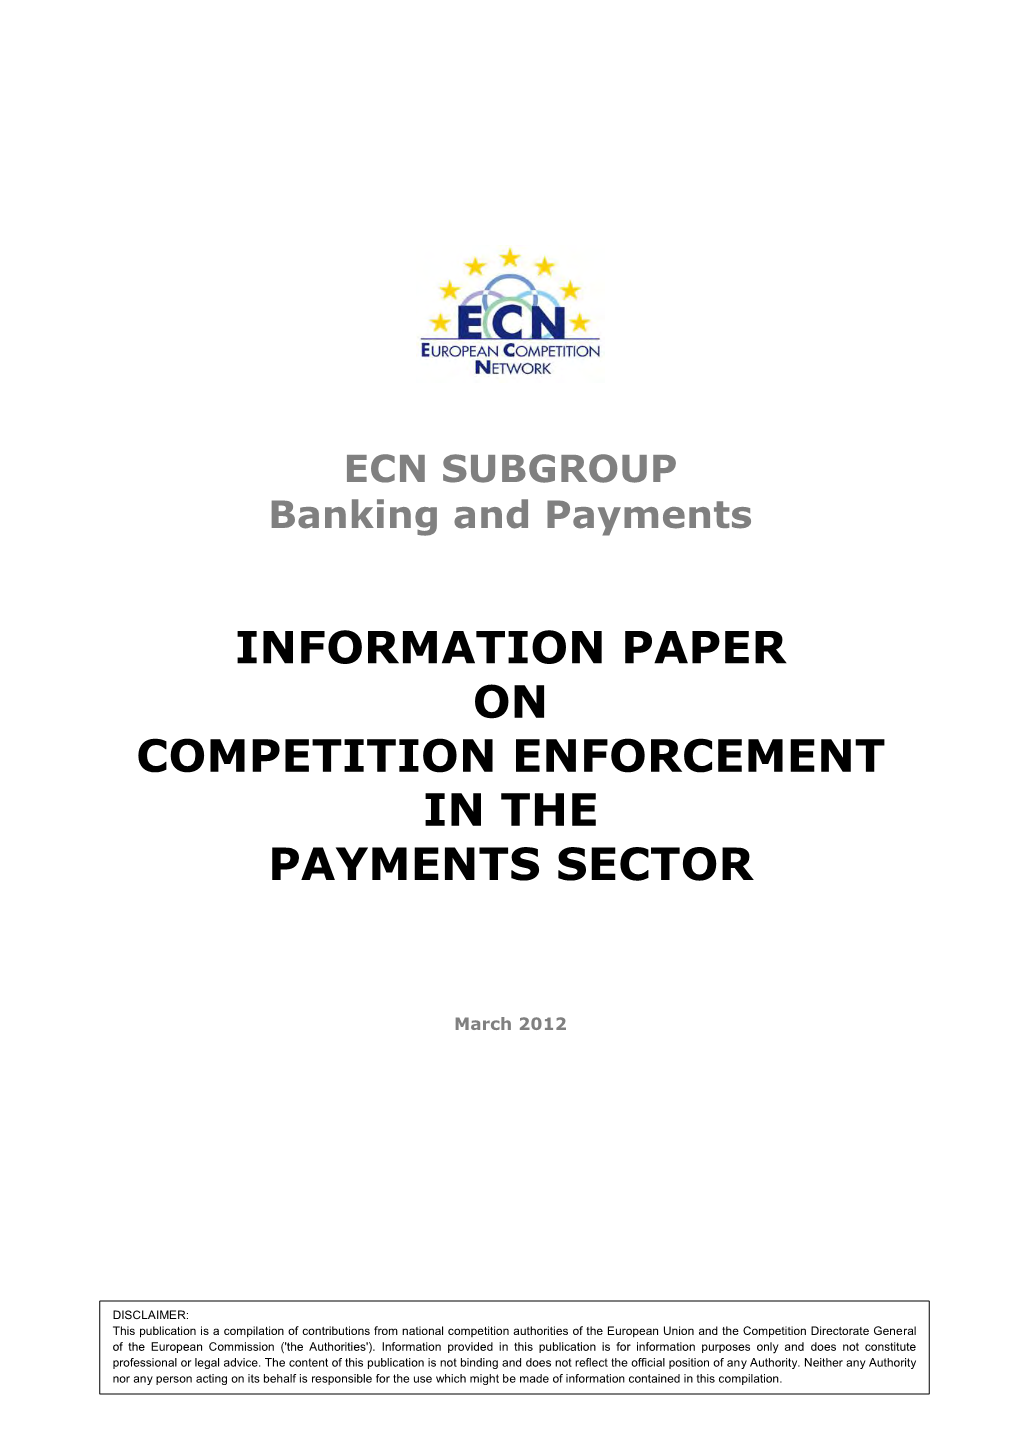 Information Paper on Competition Enforcement in the Payments Sector